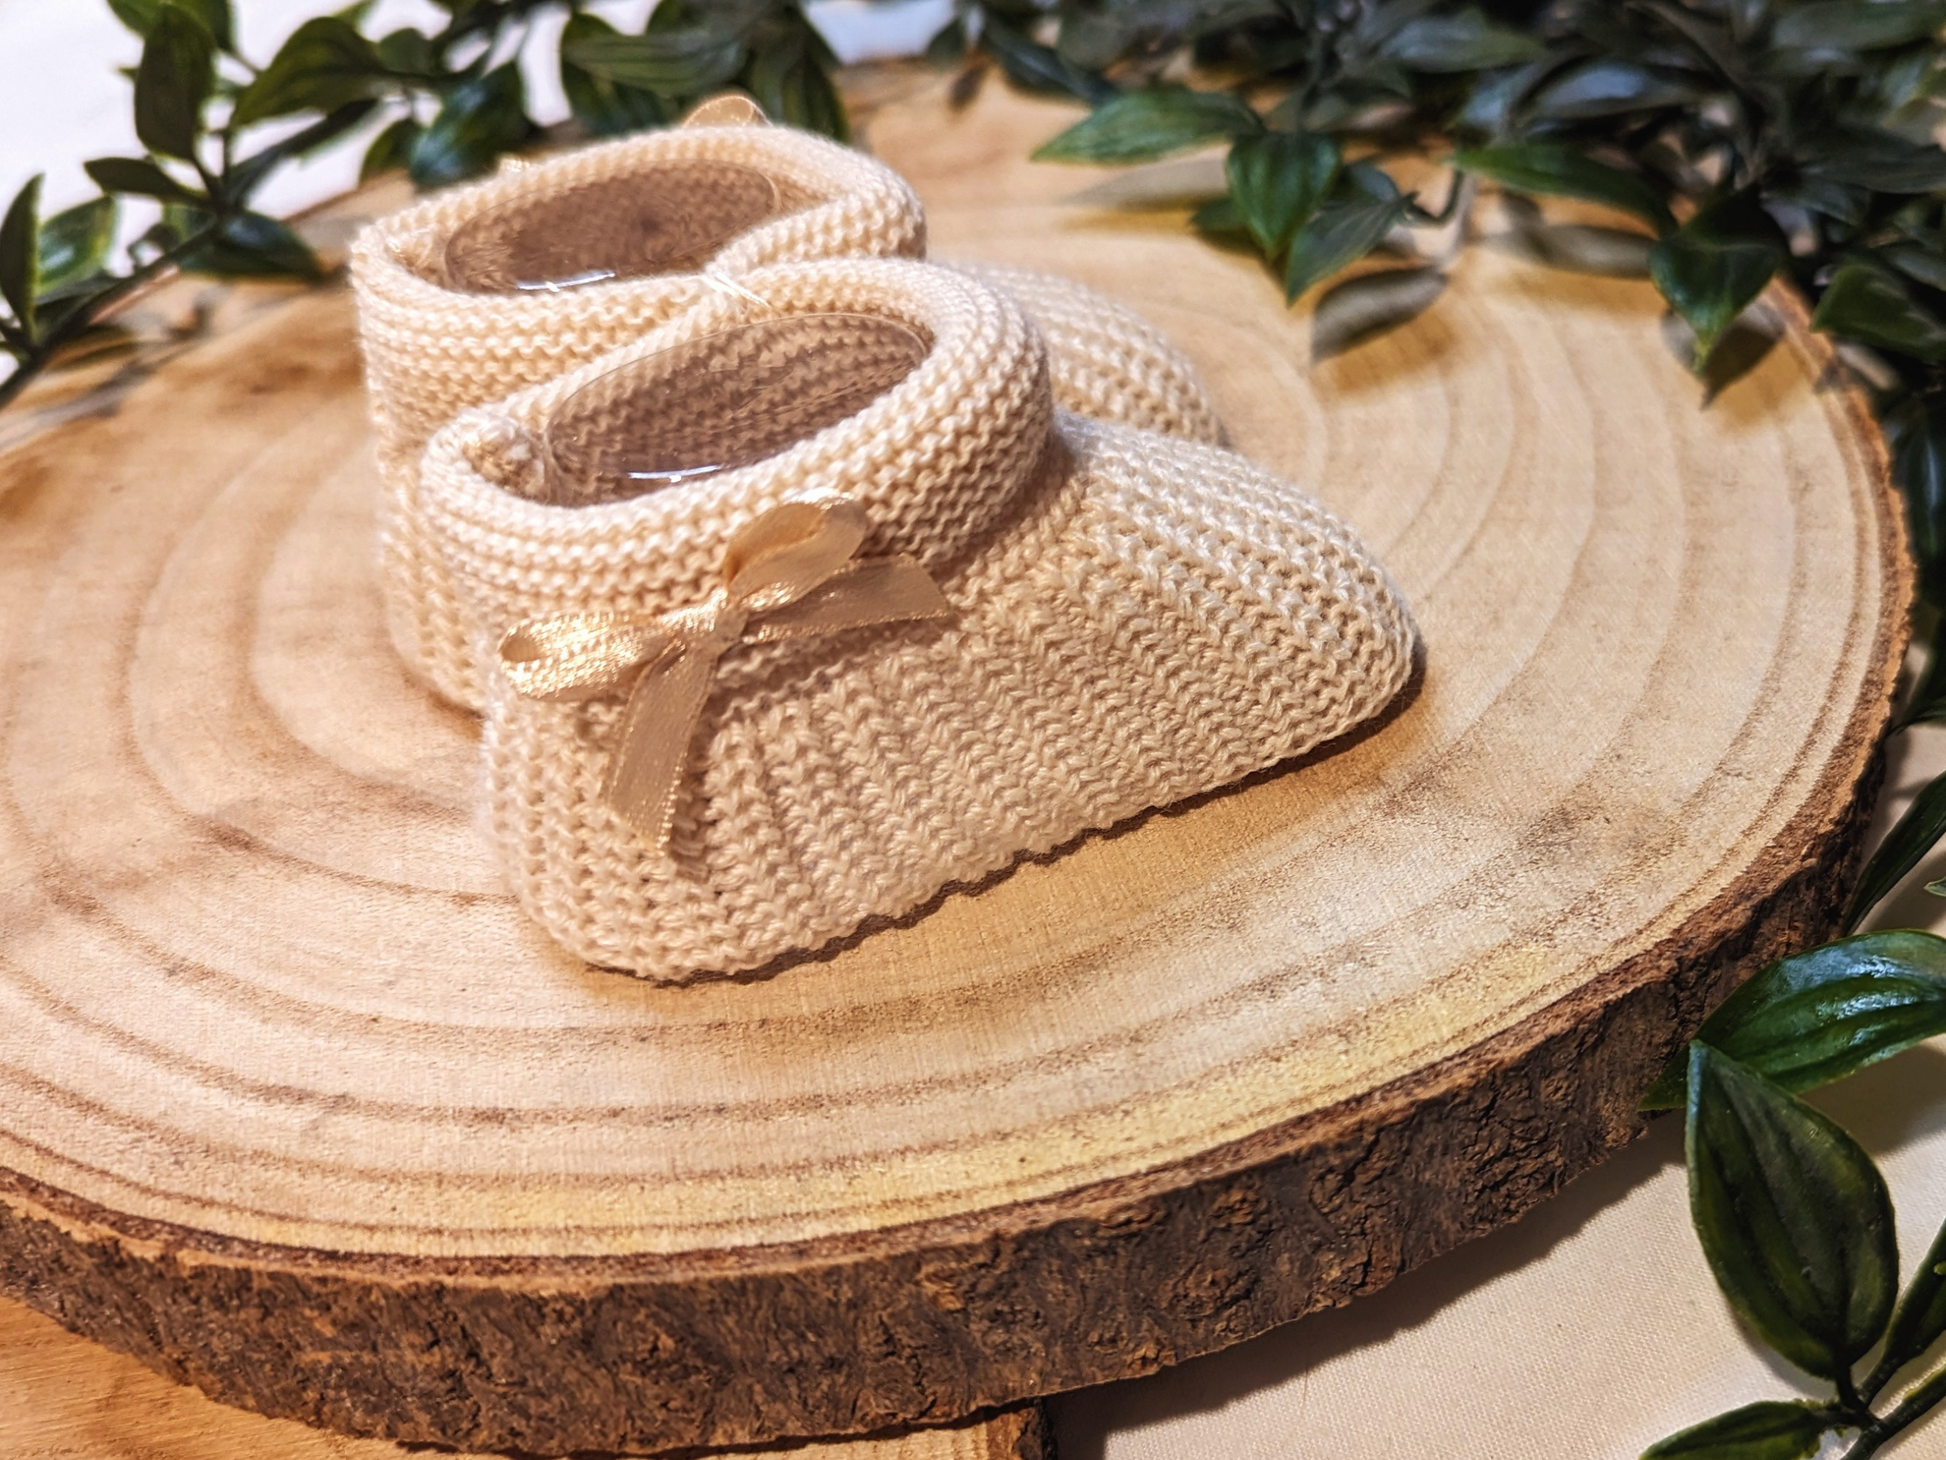 Unisex Newborn Clothes - Baby booties with a biscuit coloured knitted design, featuring a small bow on the side. (Side Angle)